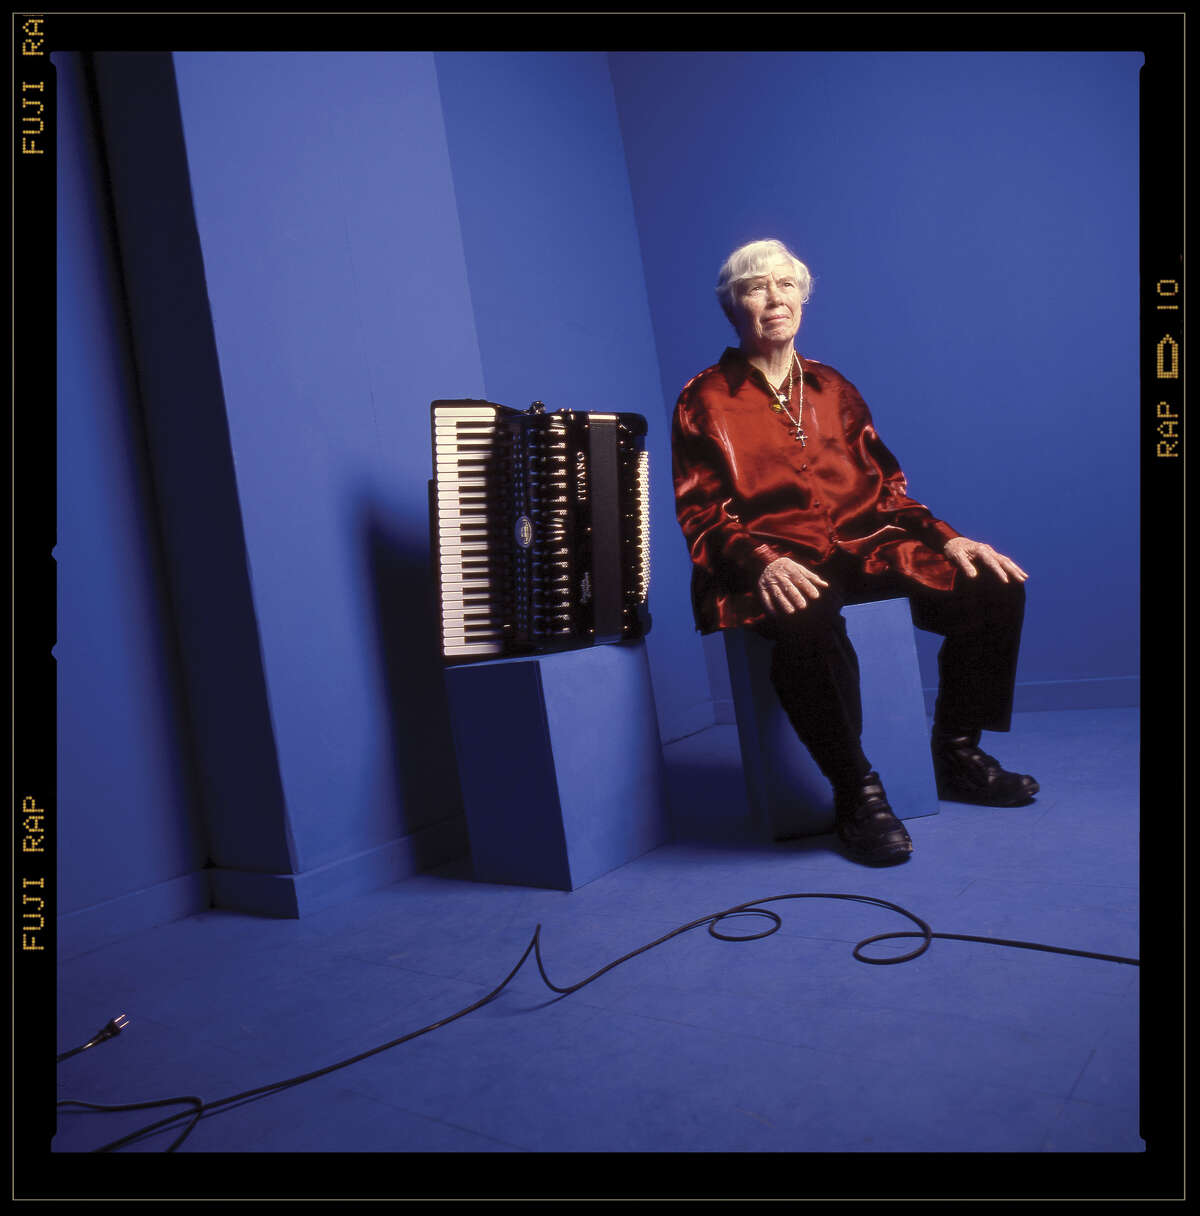 Founder of the "Deep Listening" technique, Pauline Oliveros. Credit: Mark McCarty. RESTRICTED TO ONE TIME USE. Use on A1 as tease OK. Online use OK for 7 days. MUST CREDIT.